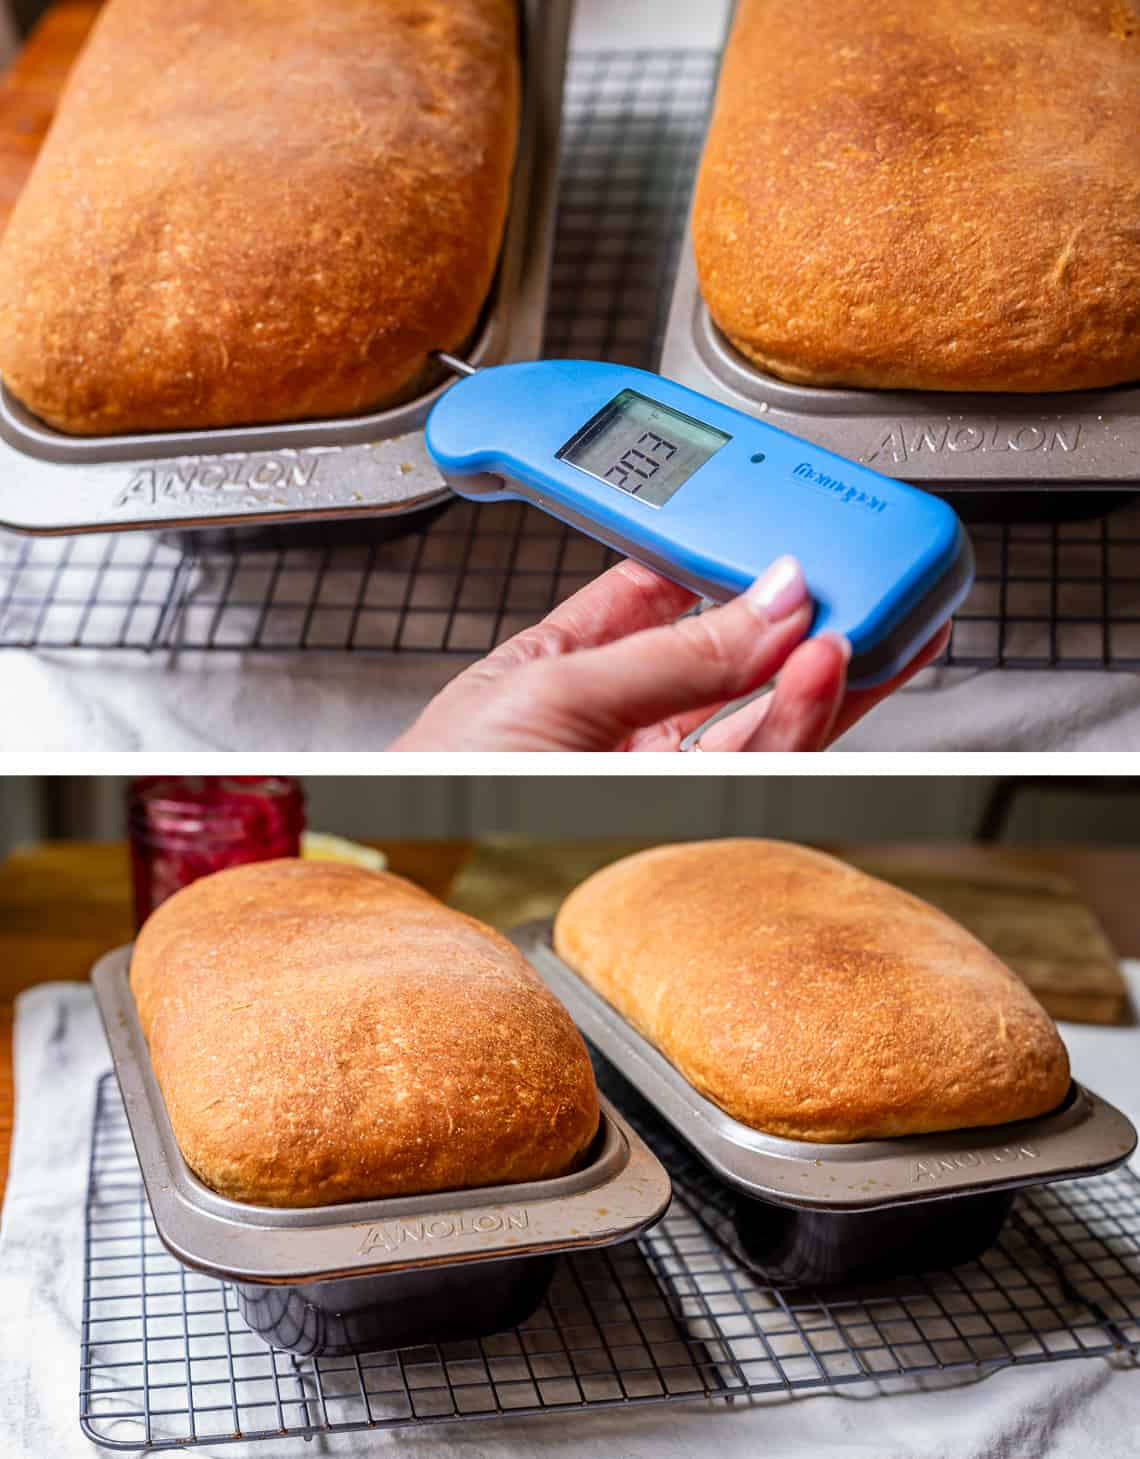 top baked loaves being checked with an instant thermometer. bottom two baked loaves.